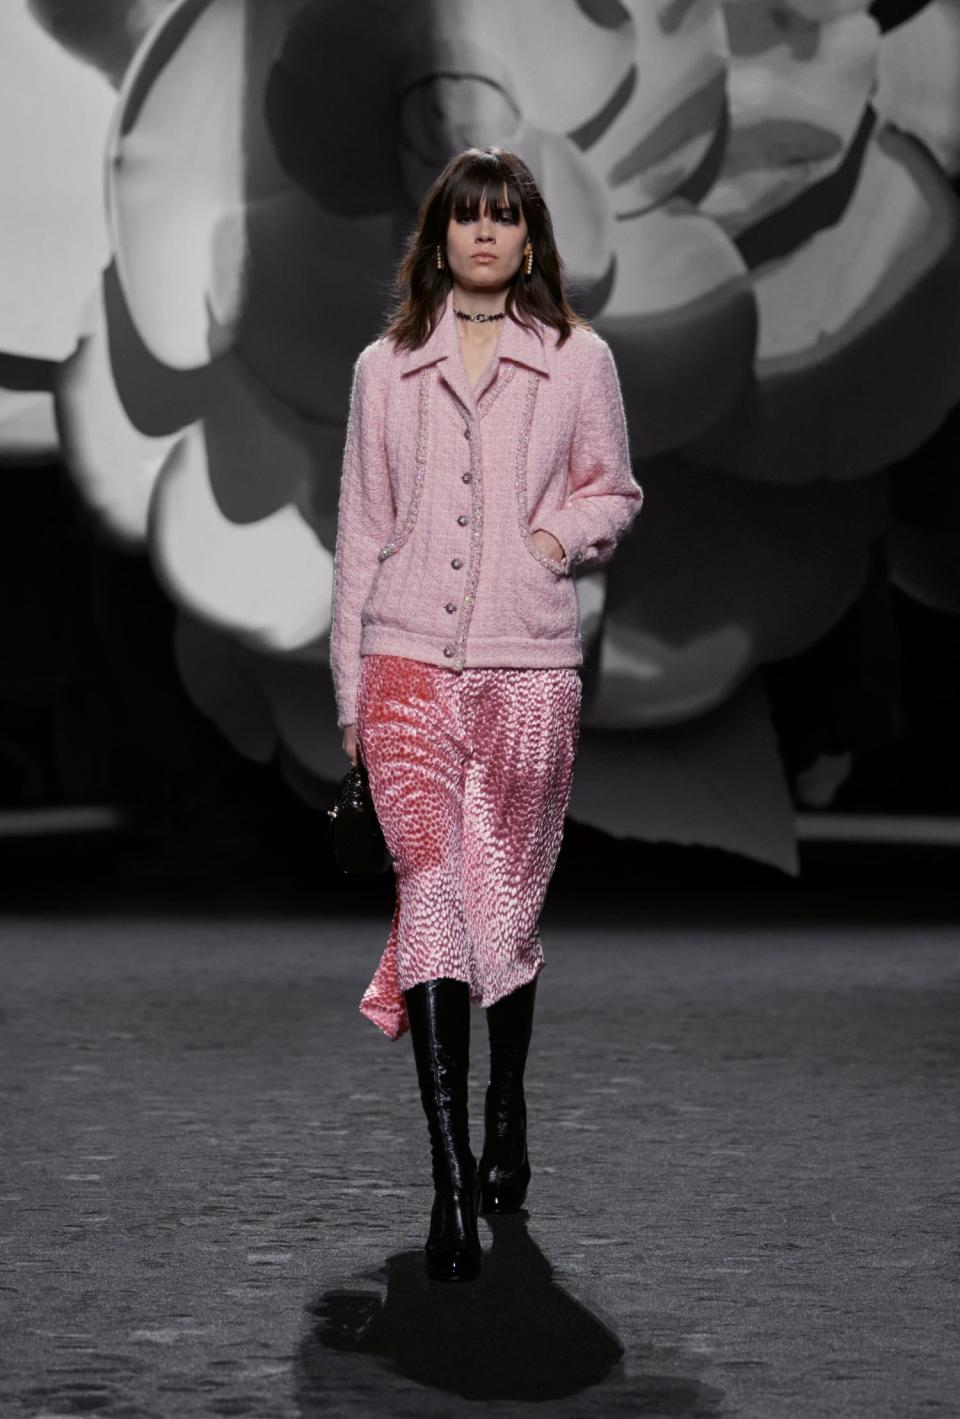 A model walking down the runway during Chanel's Fall/Winter 2023/24 show in Paris. (PHOTO: Chanel)